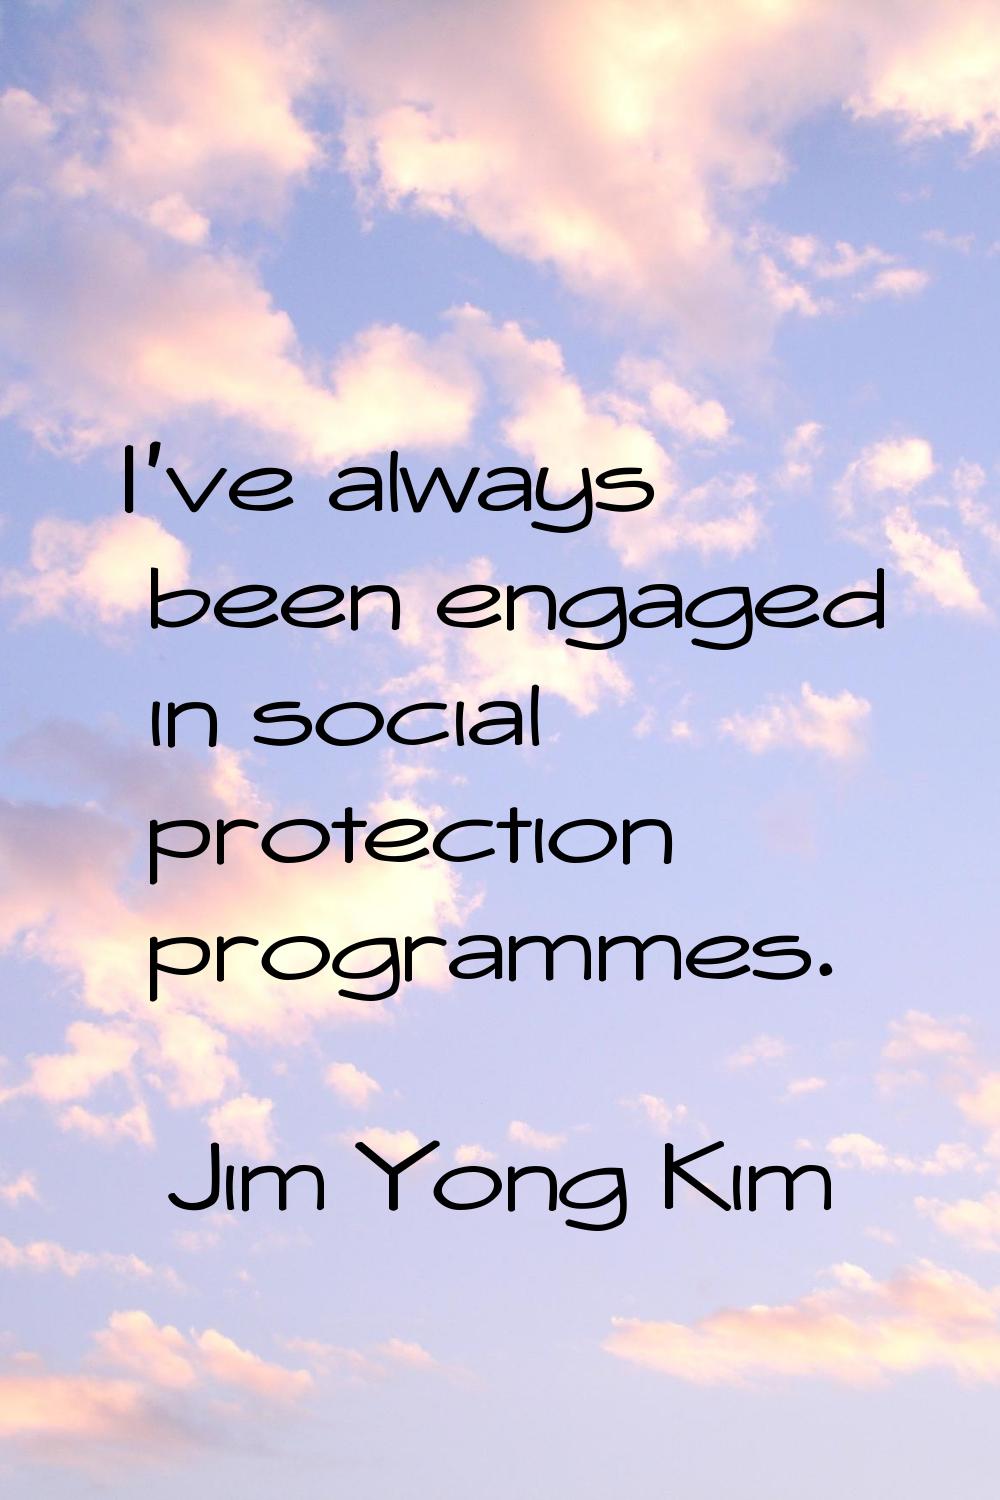 I've always been engaged in social protection programmes.